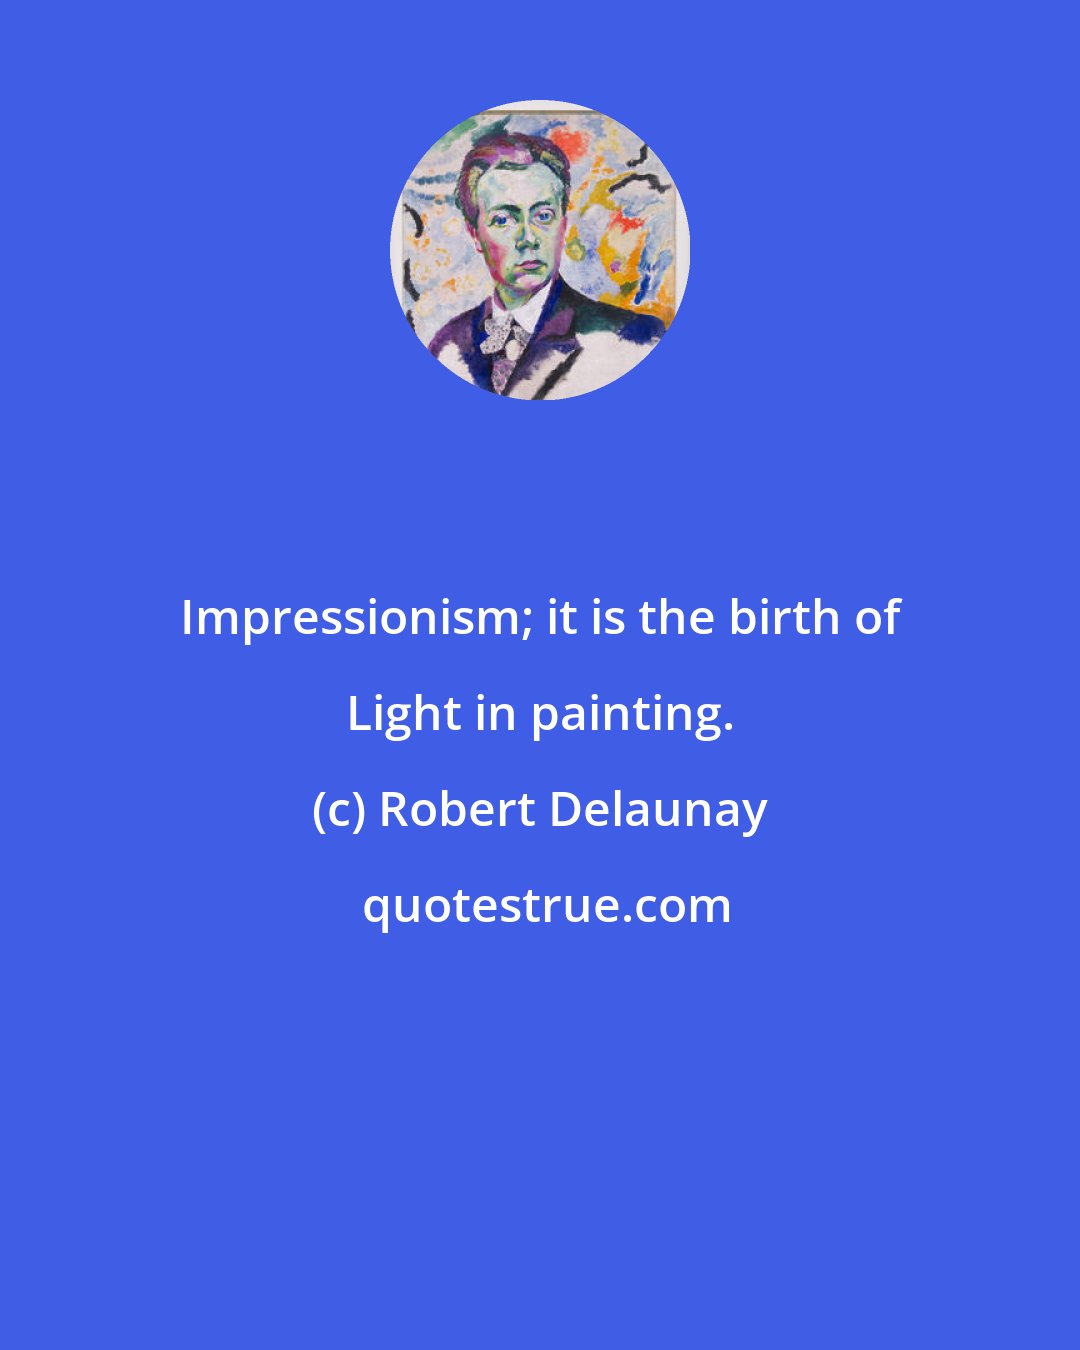 Robert Delaunay: Impressionism; it is the birth of Light in painting.